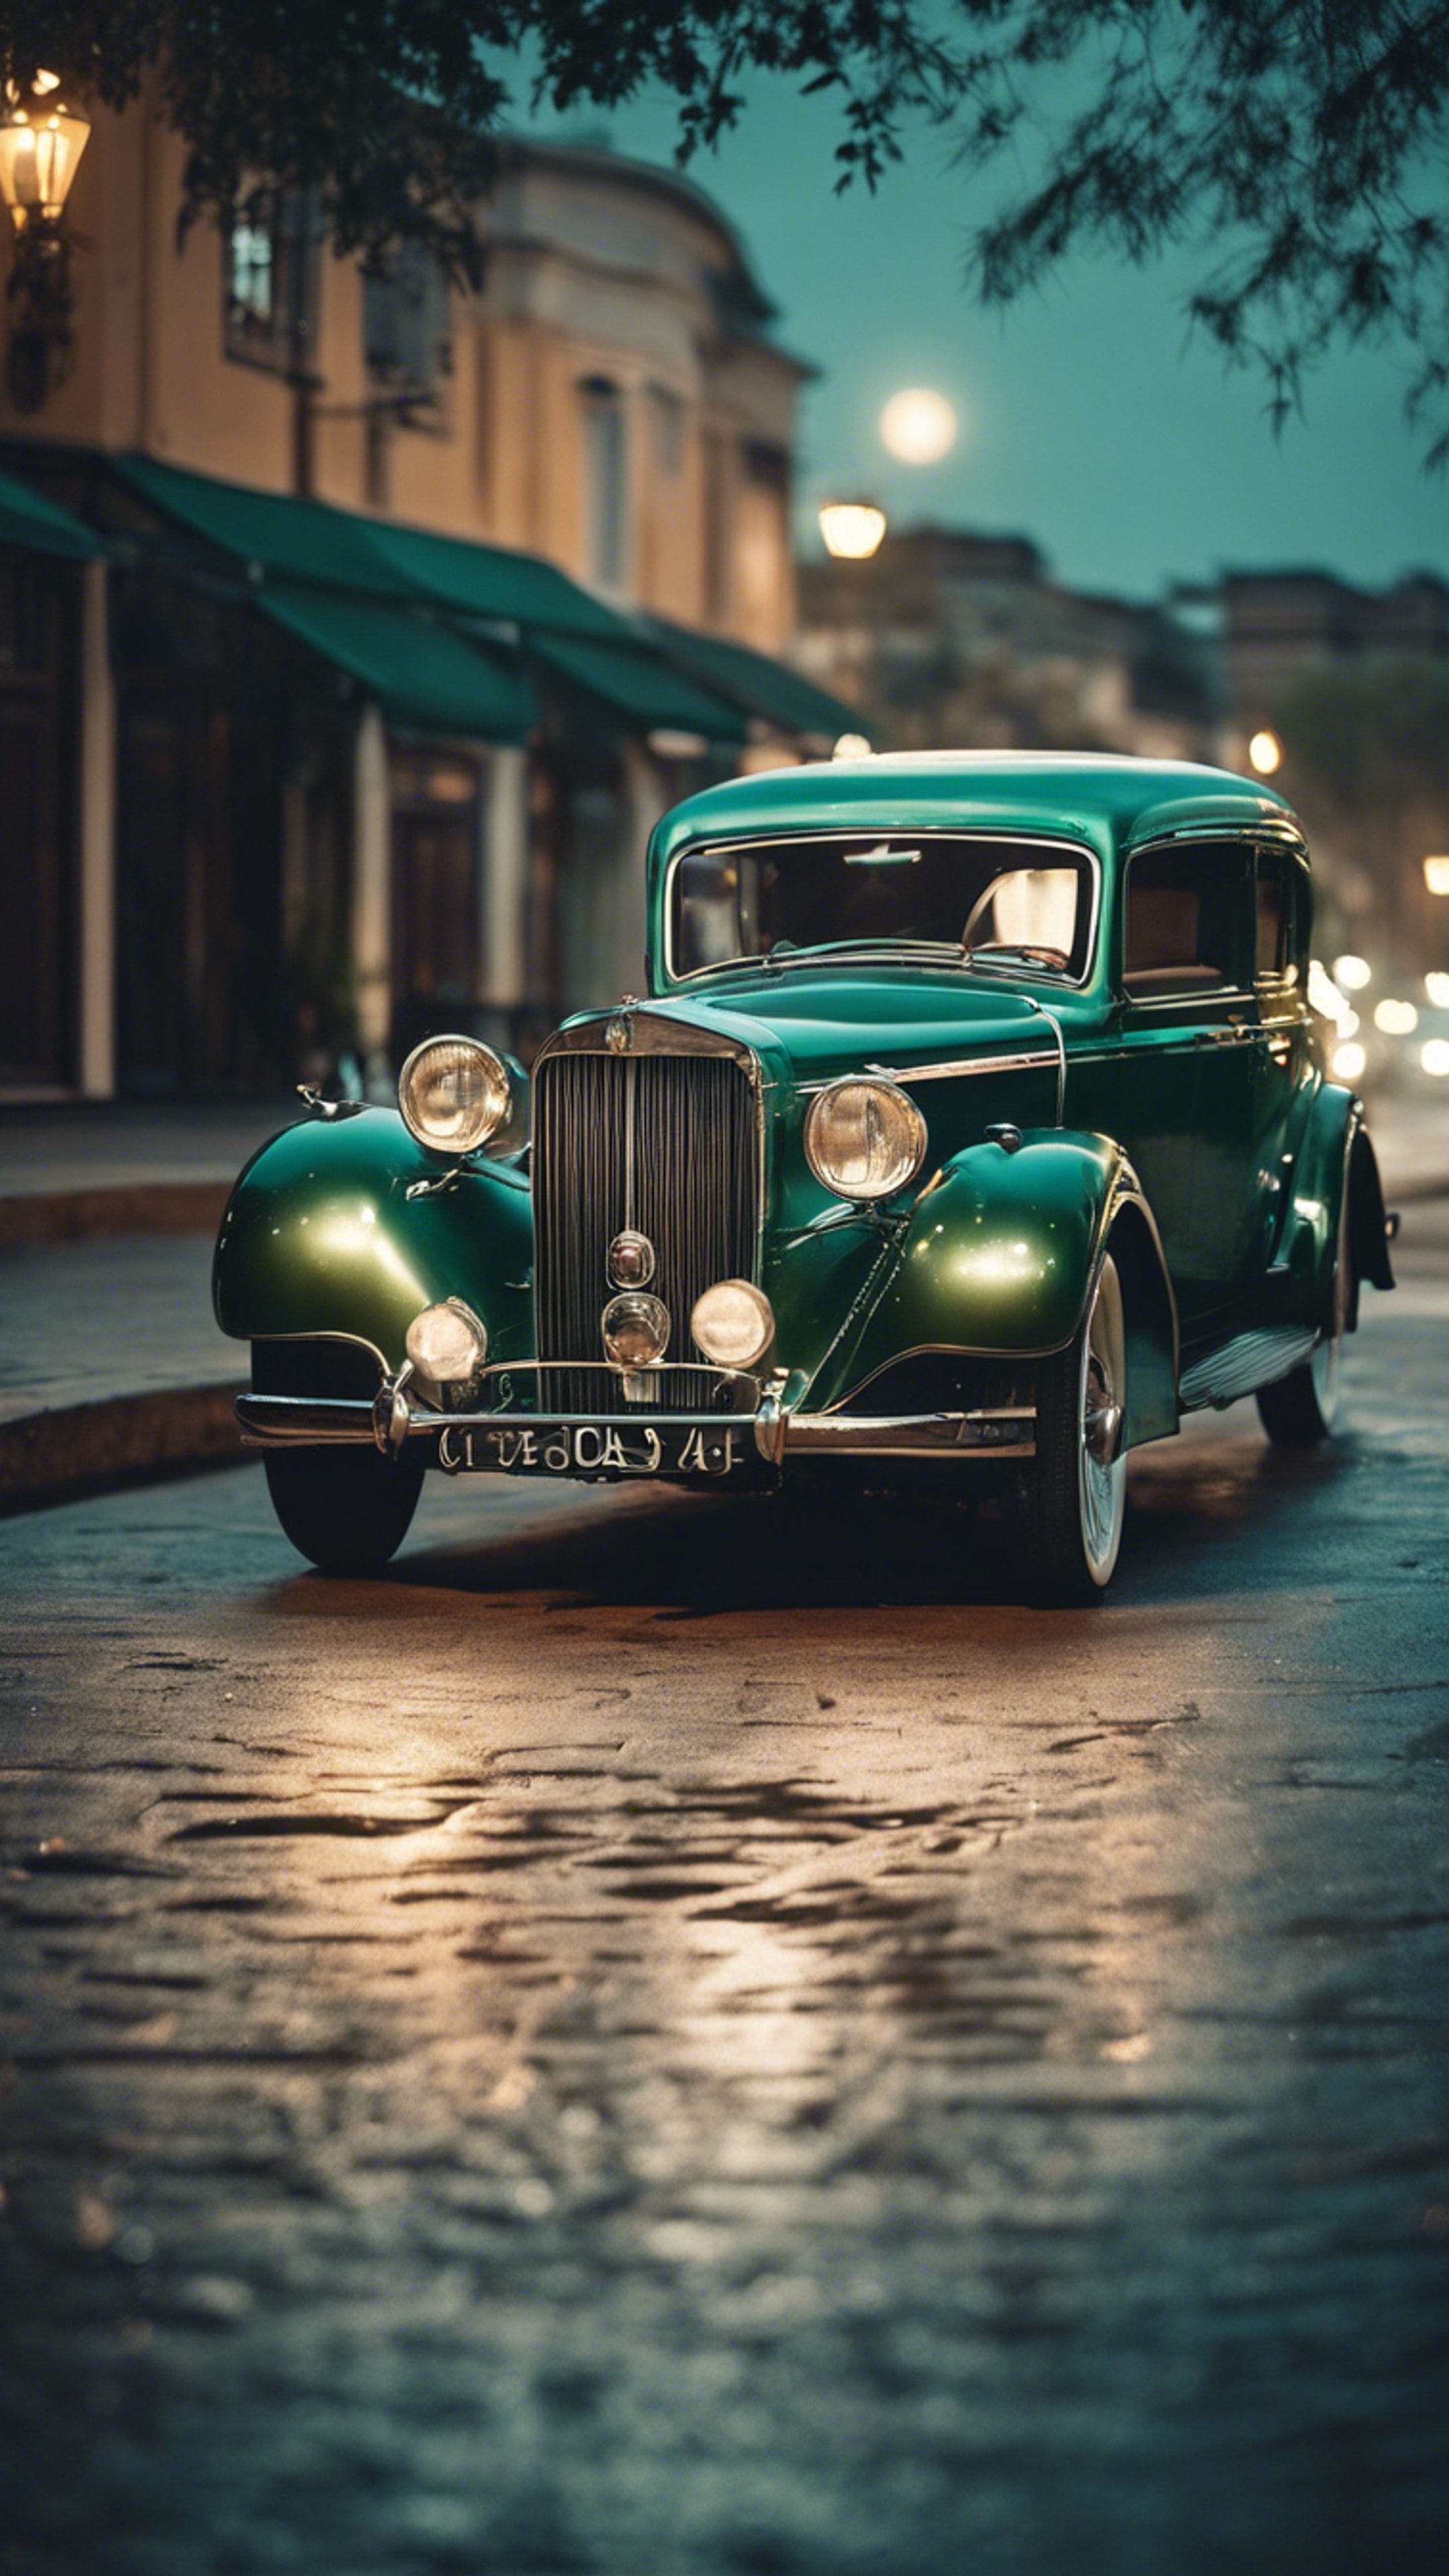 A luxurious antique car painted in cool dark green under the moonlight.壁紙[5cdba2e68b66456f8c5a]